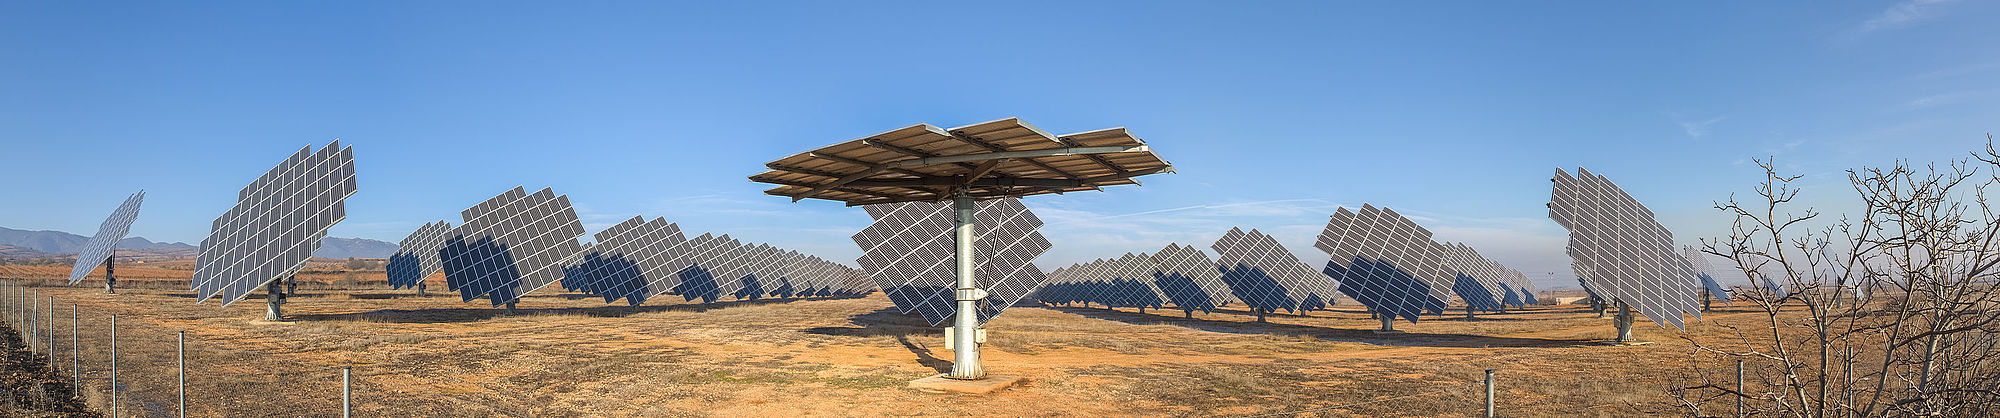 Panoramic view of the photovoltaic power station of Cariñena, Zaragoza, Spain. The panels are mounted on dual axis trackers in order to maximise the intensity of incoming direct radiation. This solution enables the arrays to track the sun in its daily orbit.